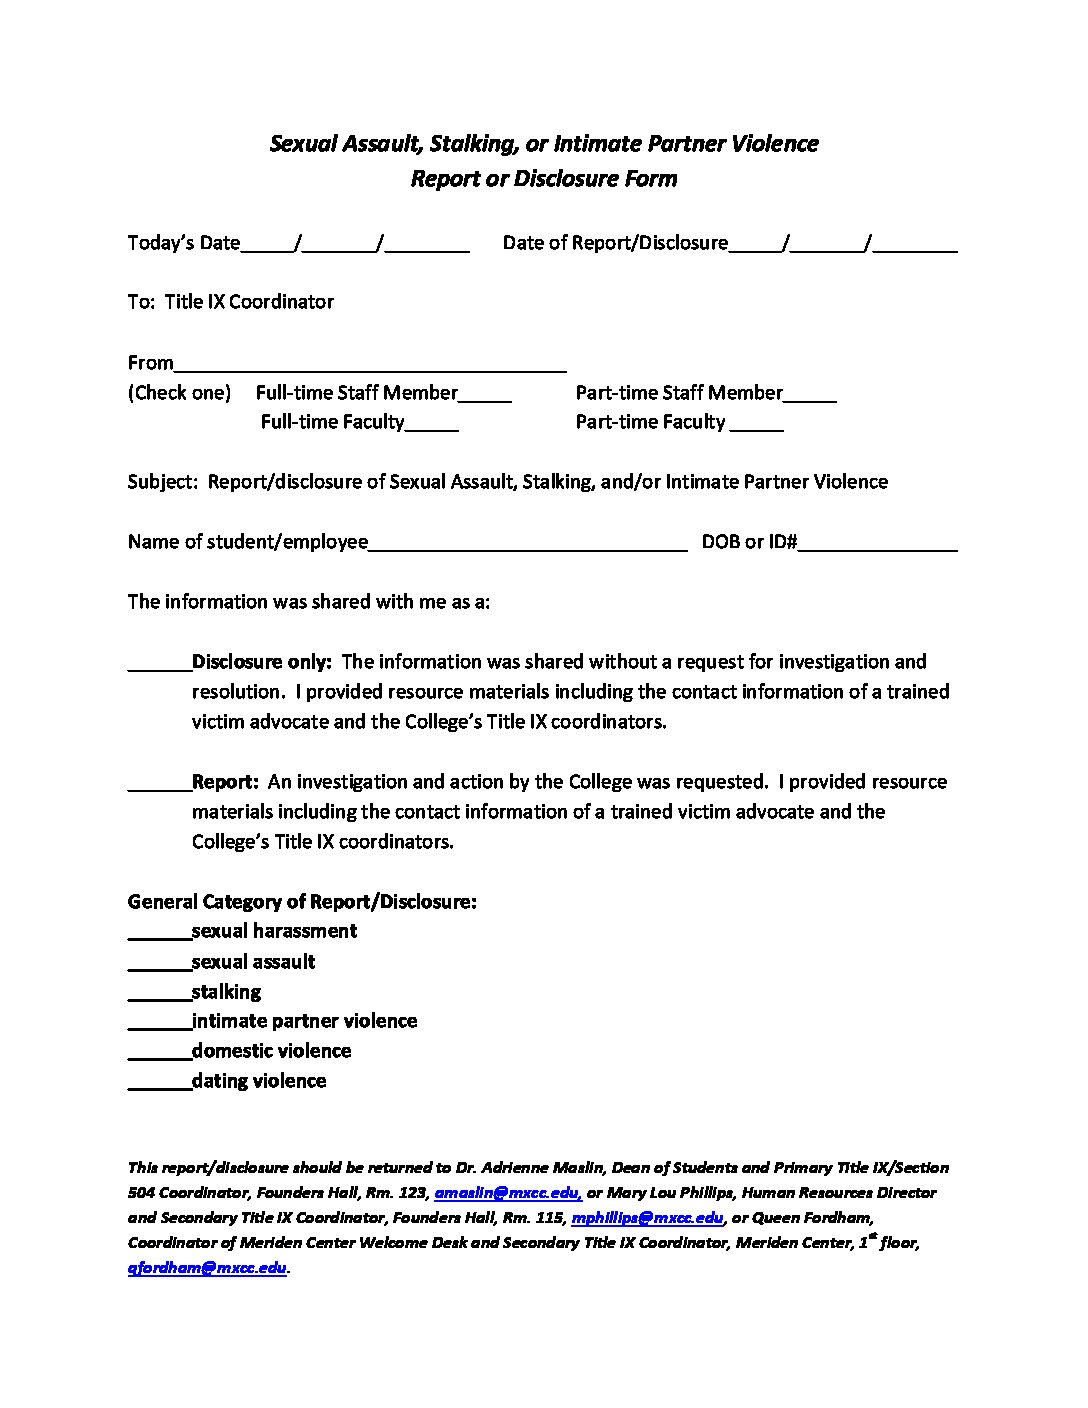 Sexual Assault Report Disclosure Form Fillable Ct State Middlesex 6770